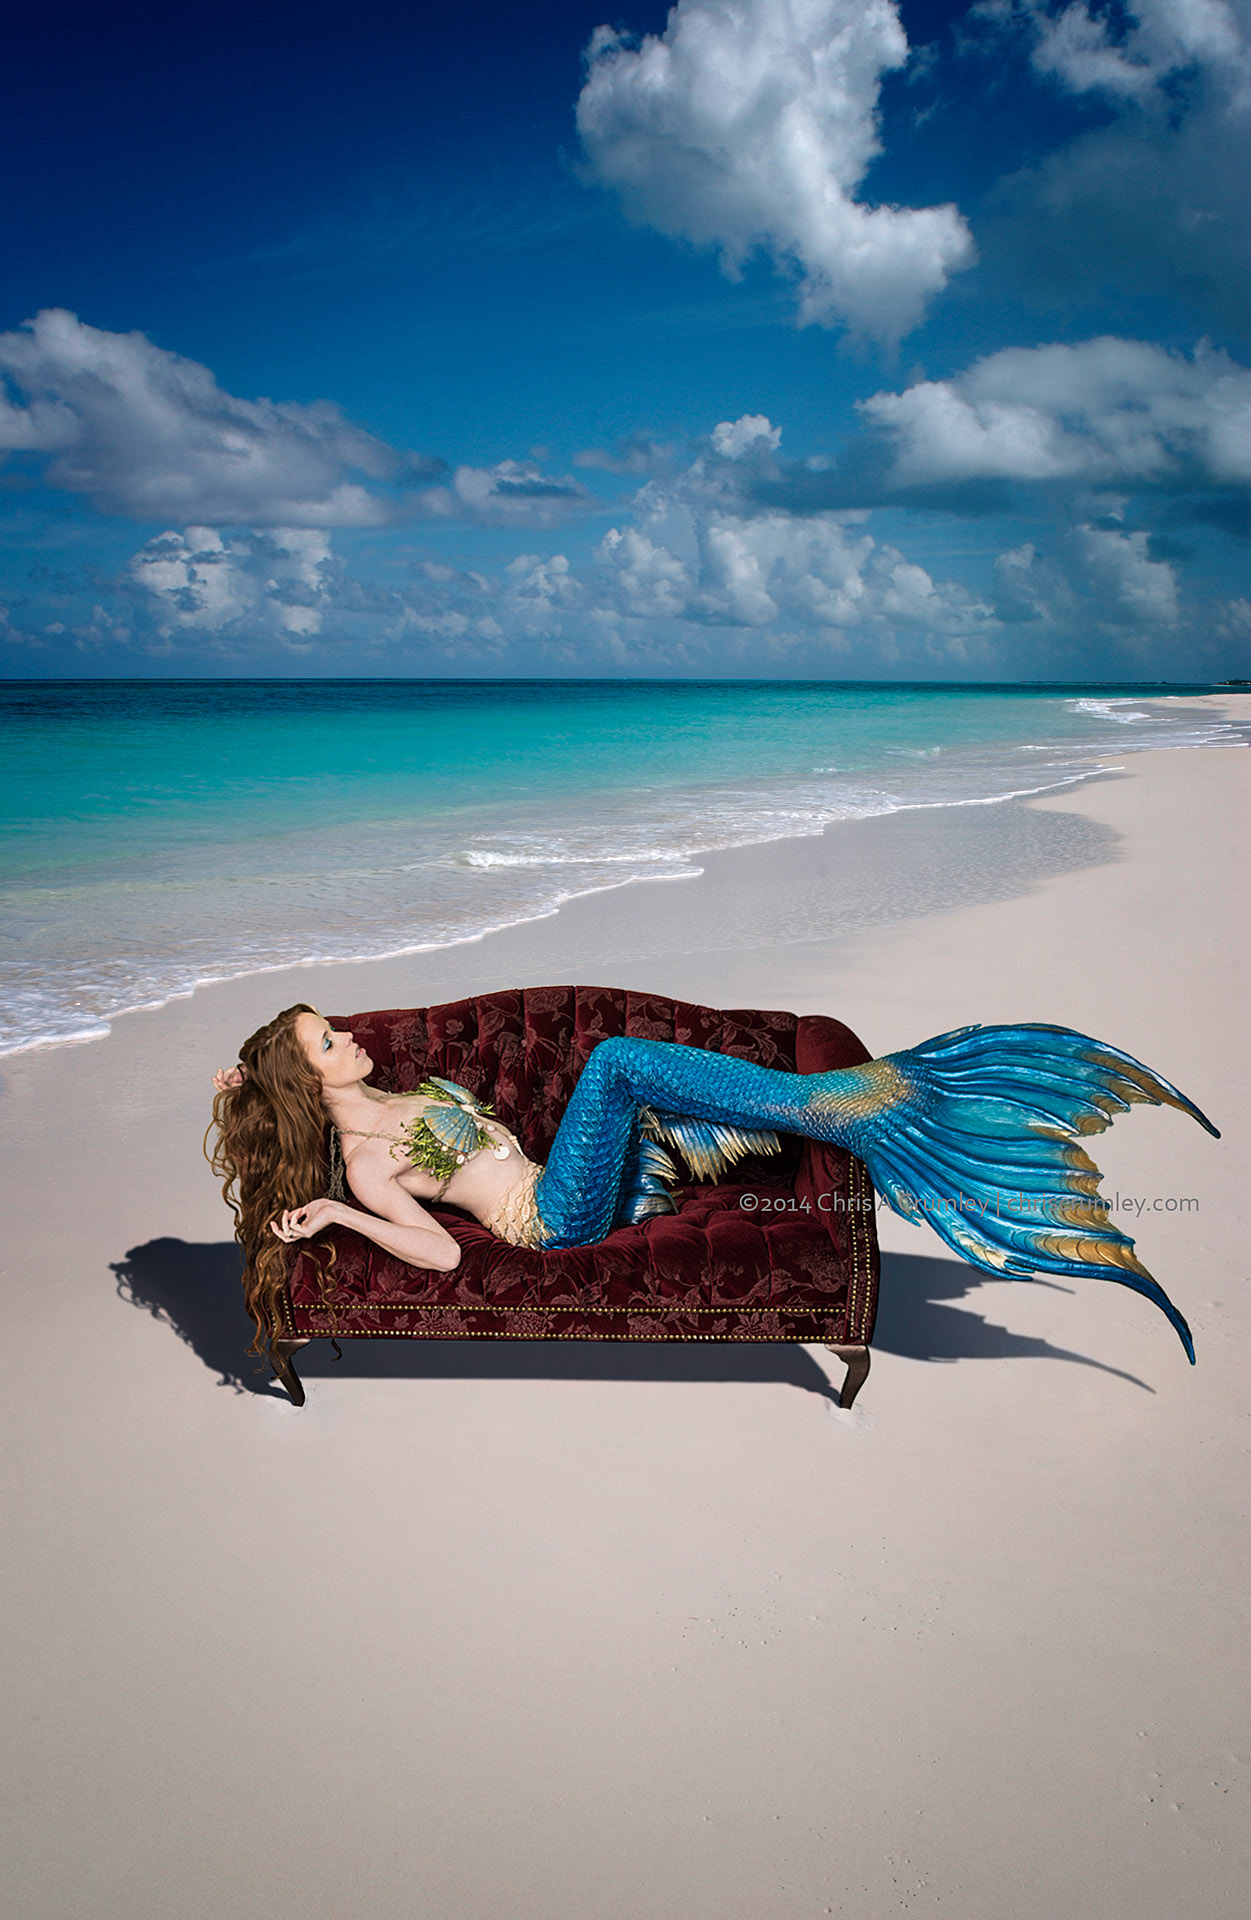 Mermaid and the Red Love Seat